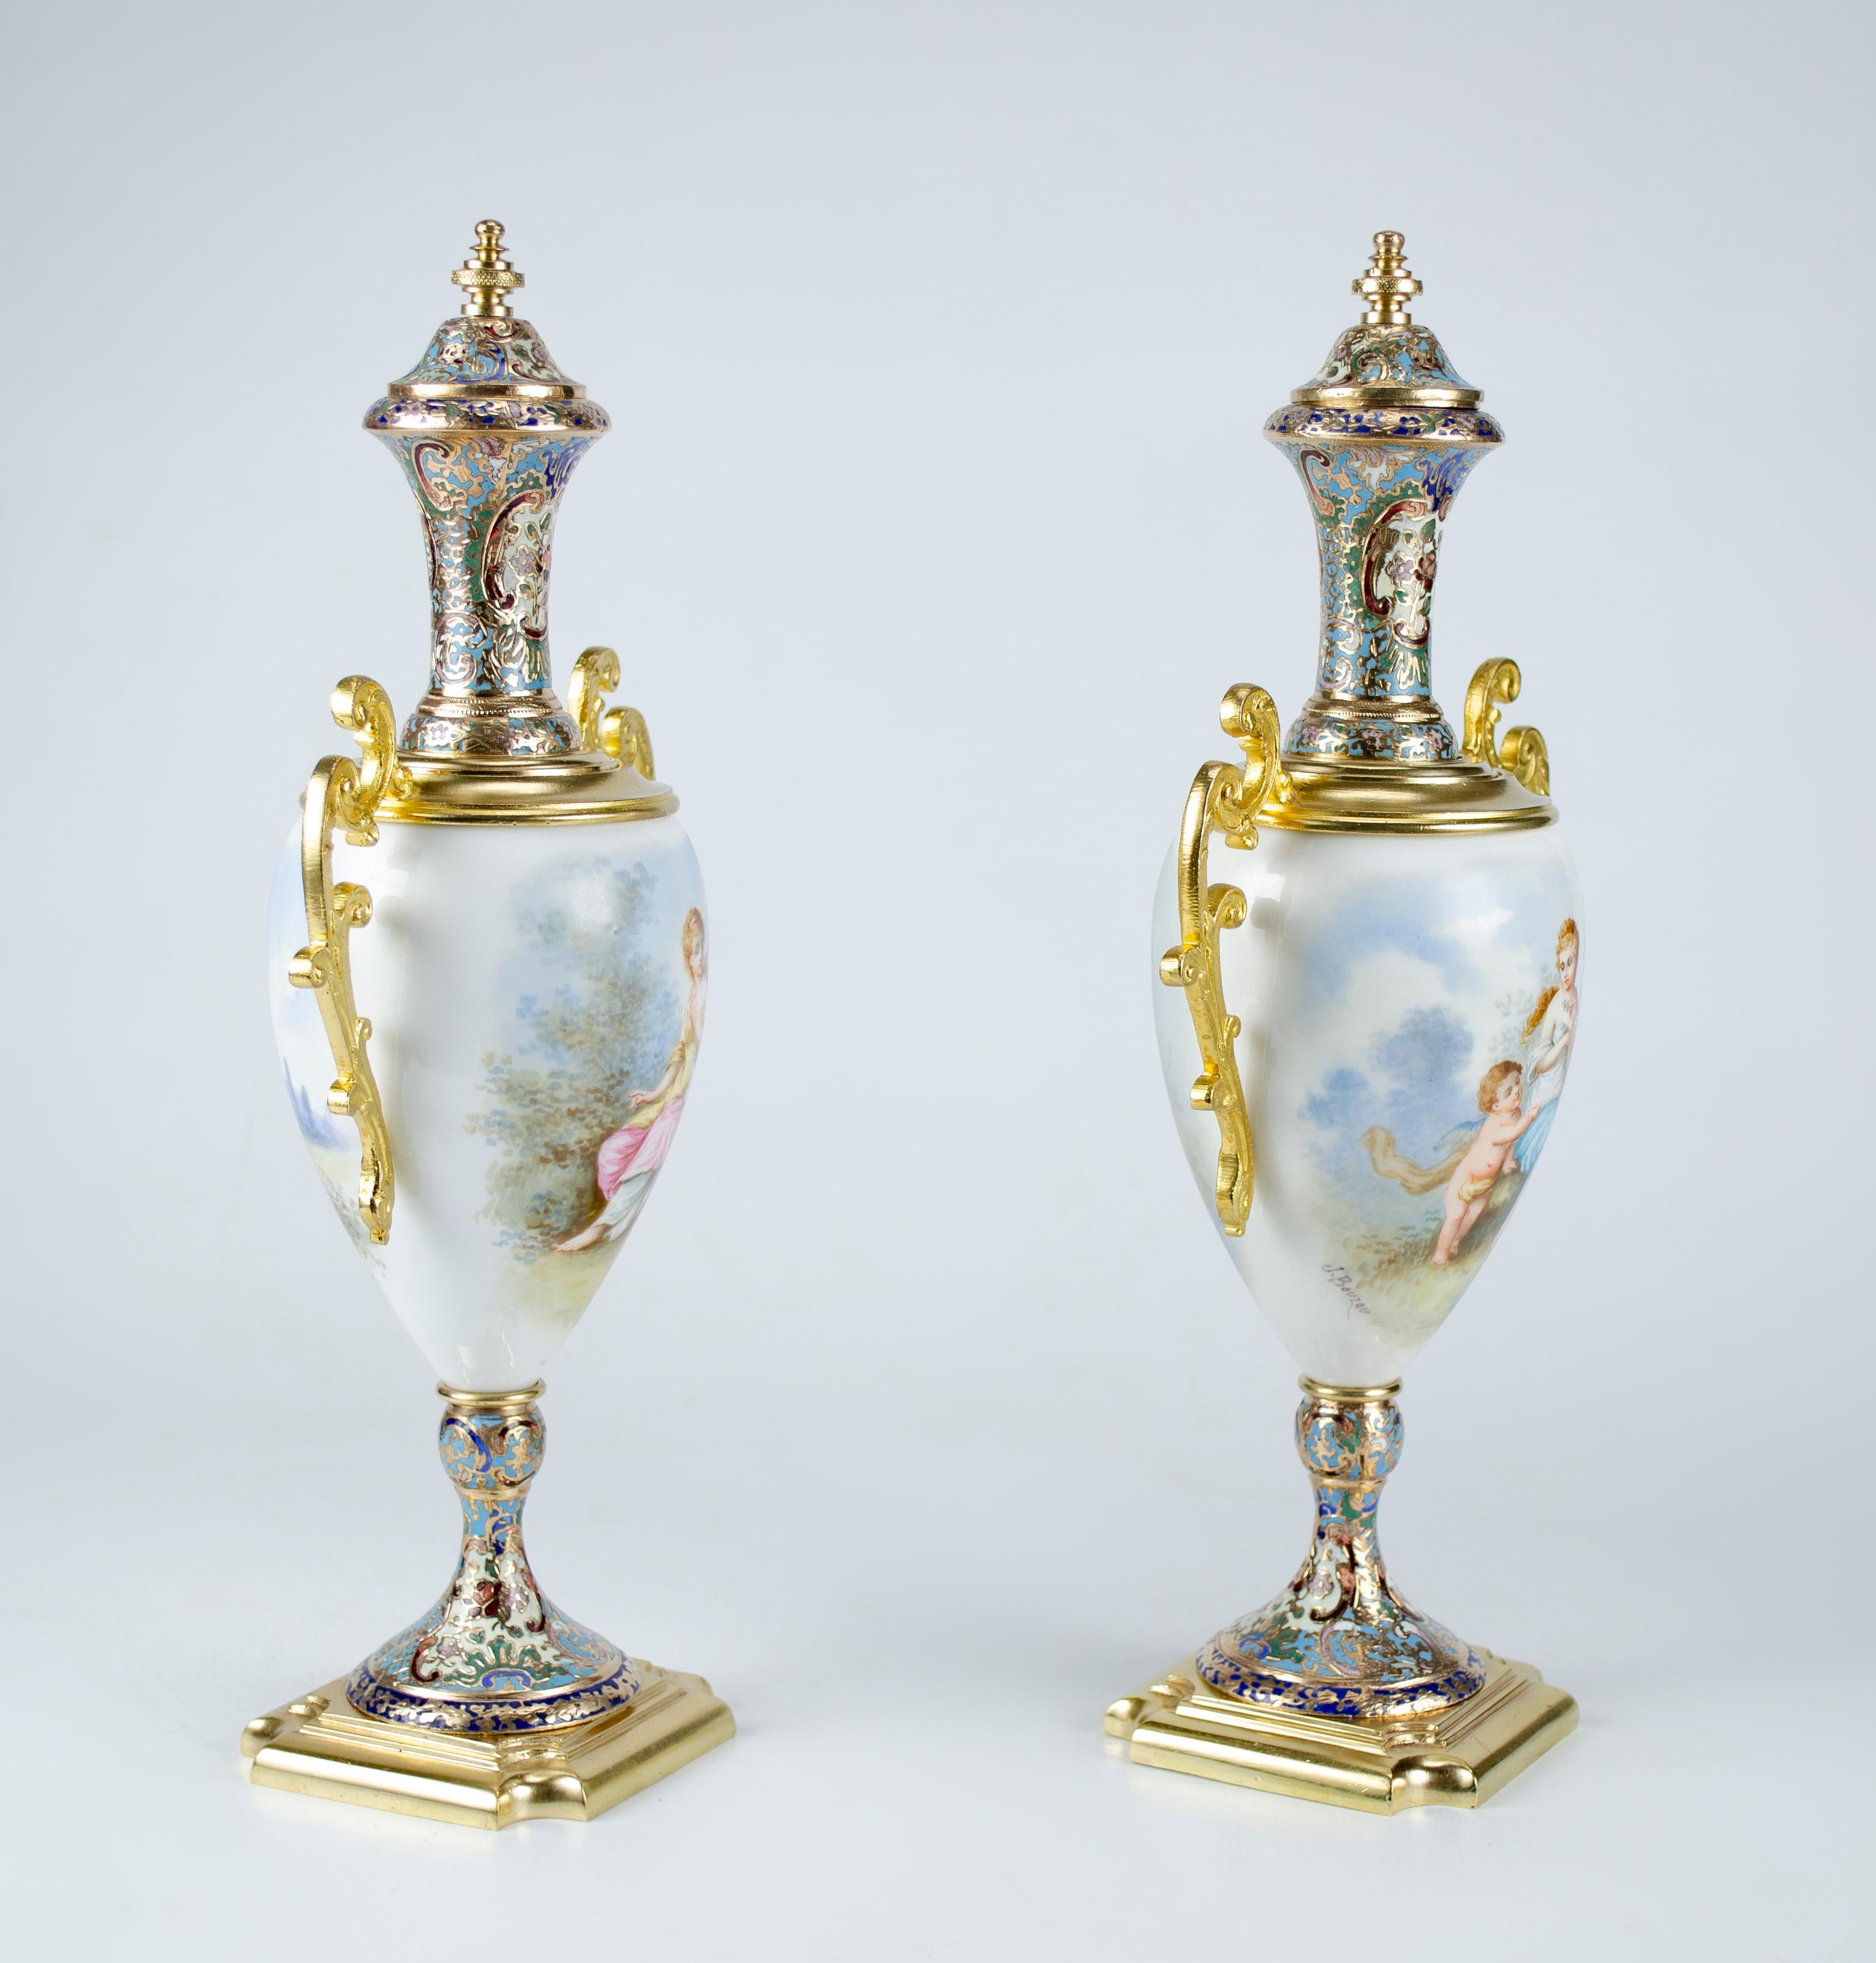 Pair of Napoleon III amphorae
great quality piece
Sevres-style
Porcelain and gilt bronze
Hand painted and signed J bouzon
Champleve enamel
perfect condition
Origin France Circa 1900
without restorations.
The Napoleon III style had its heyday during